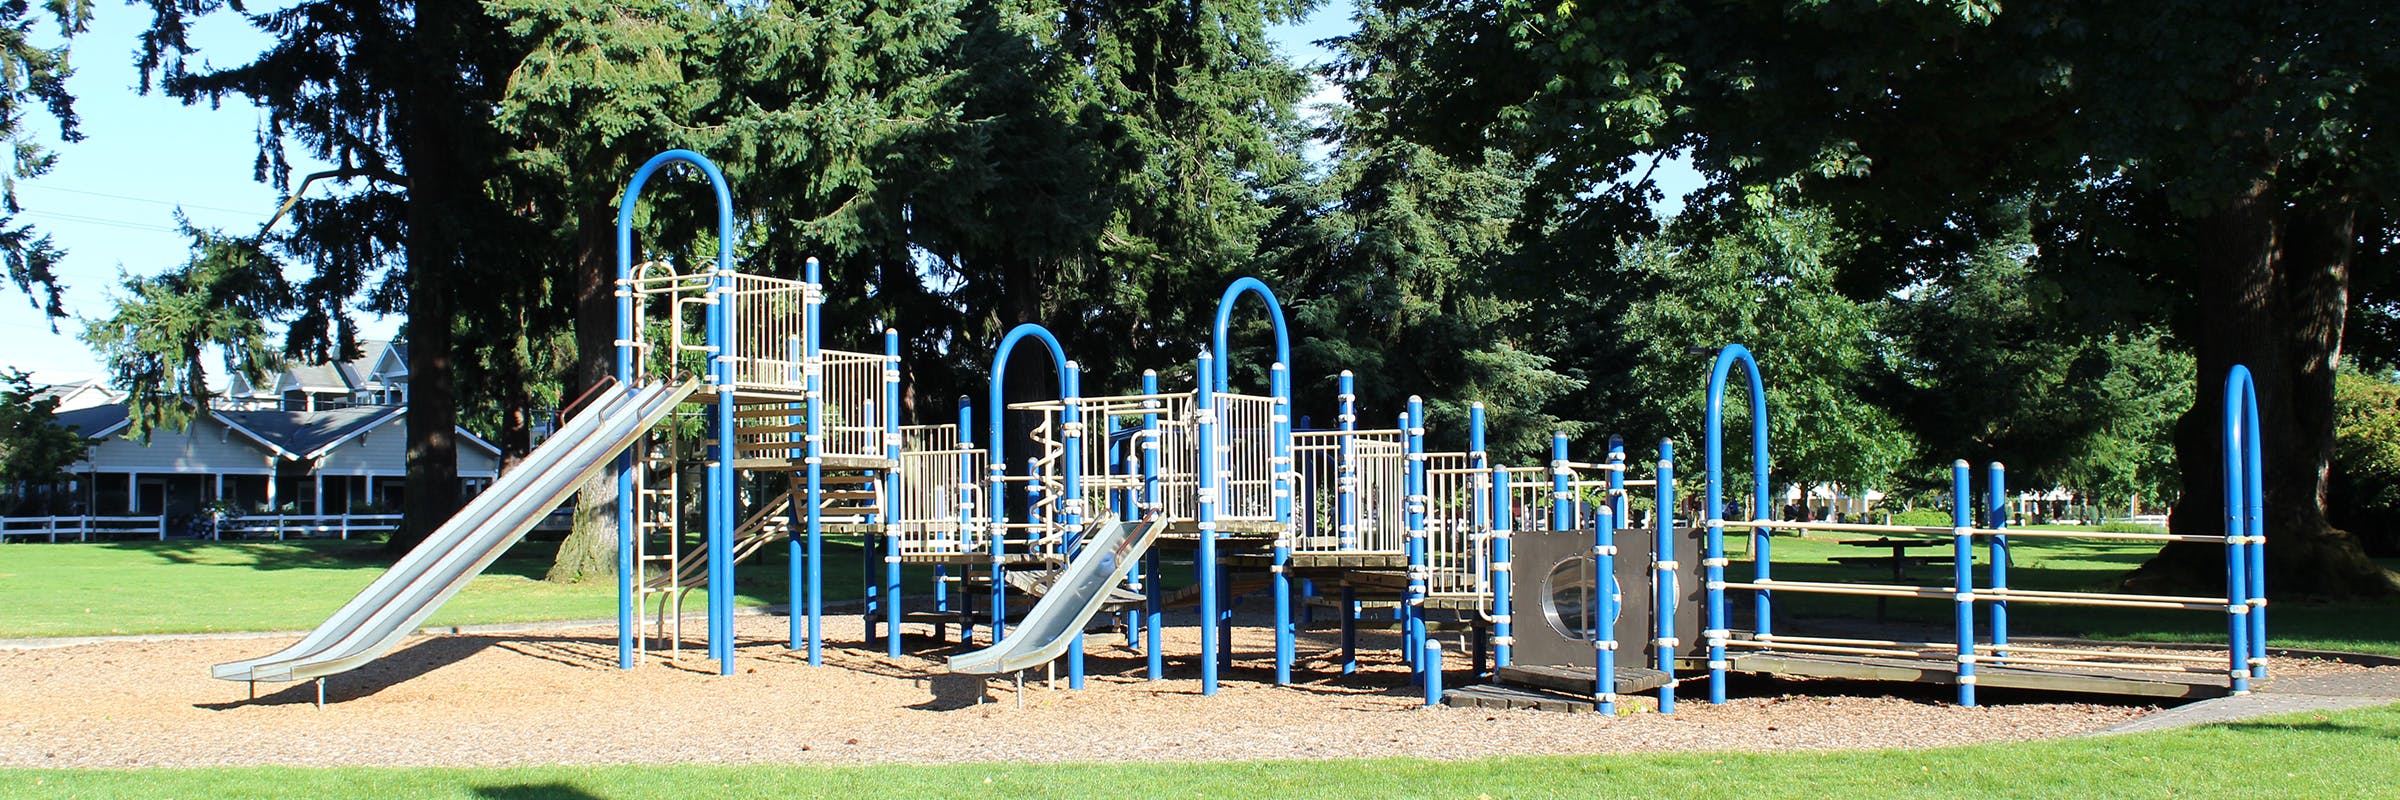 An old blue metal play structure with slides and platforms surrounded by wood chips in a lush, green park. 